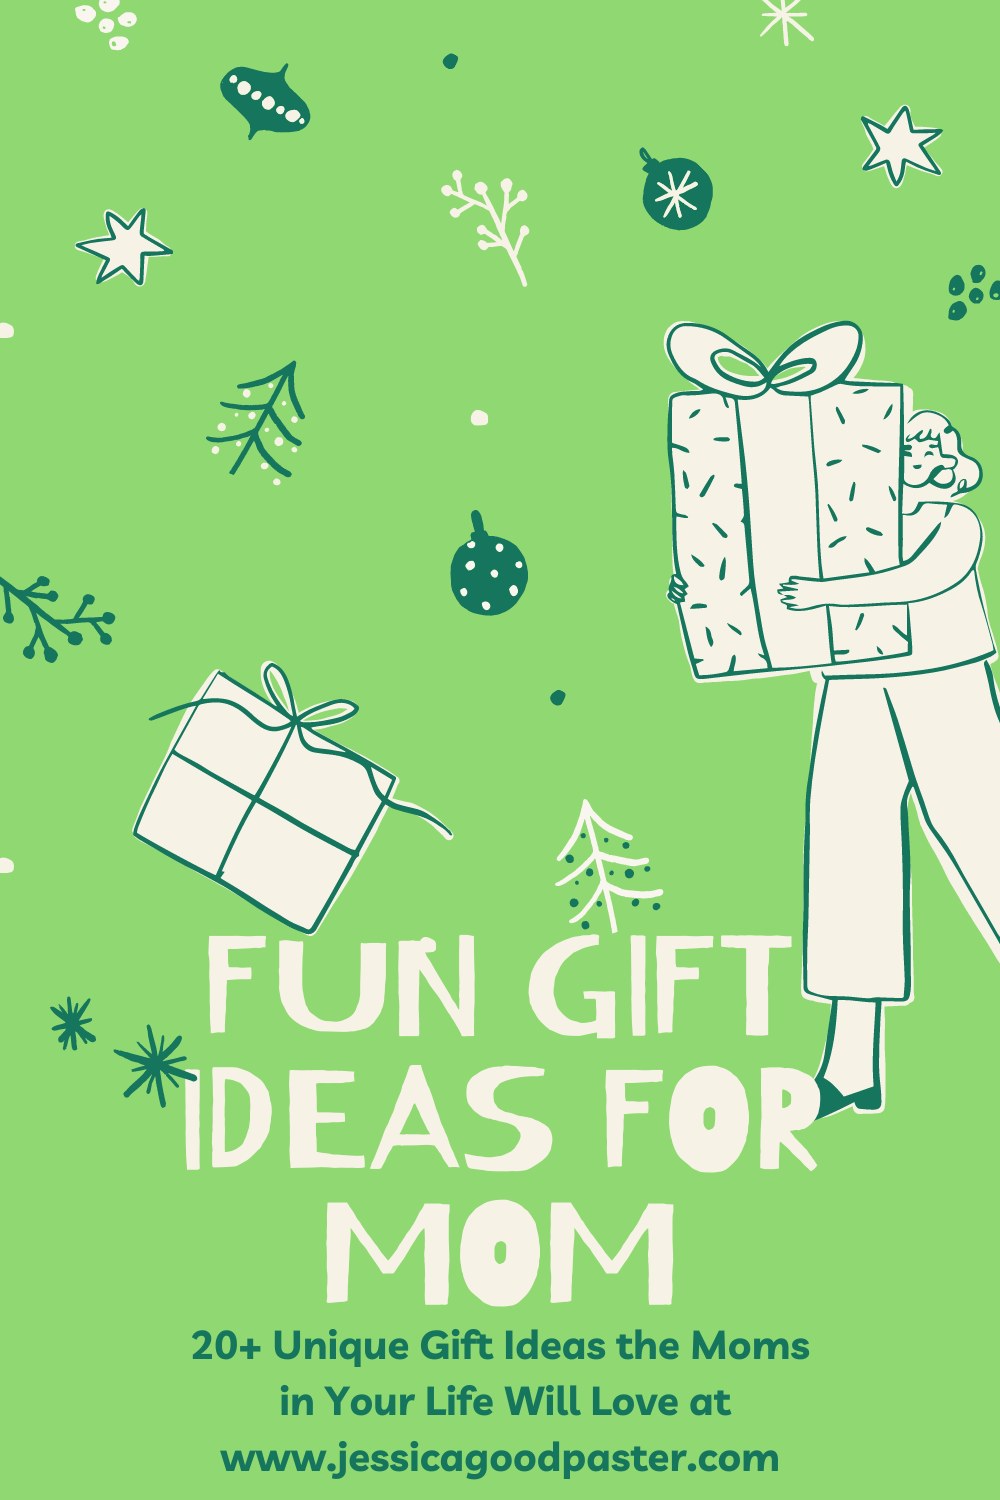 Fun Gift Ideas for Mom | Find the perfect Christmas gift for your mom, grandmother, or wife with this list of unique gift ideas! Some are meaningful, fun, useful, or edible. Also includes the best subscription box ideas. Even if your mom has everything, you'll find the present that is just right! #christmasgifts #giftideas #giftideasforher #giftideasformom #uniquegifts #fungiftideas #thoughtfulgifts #christmas2020 #bestgiftideas